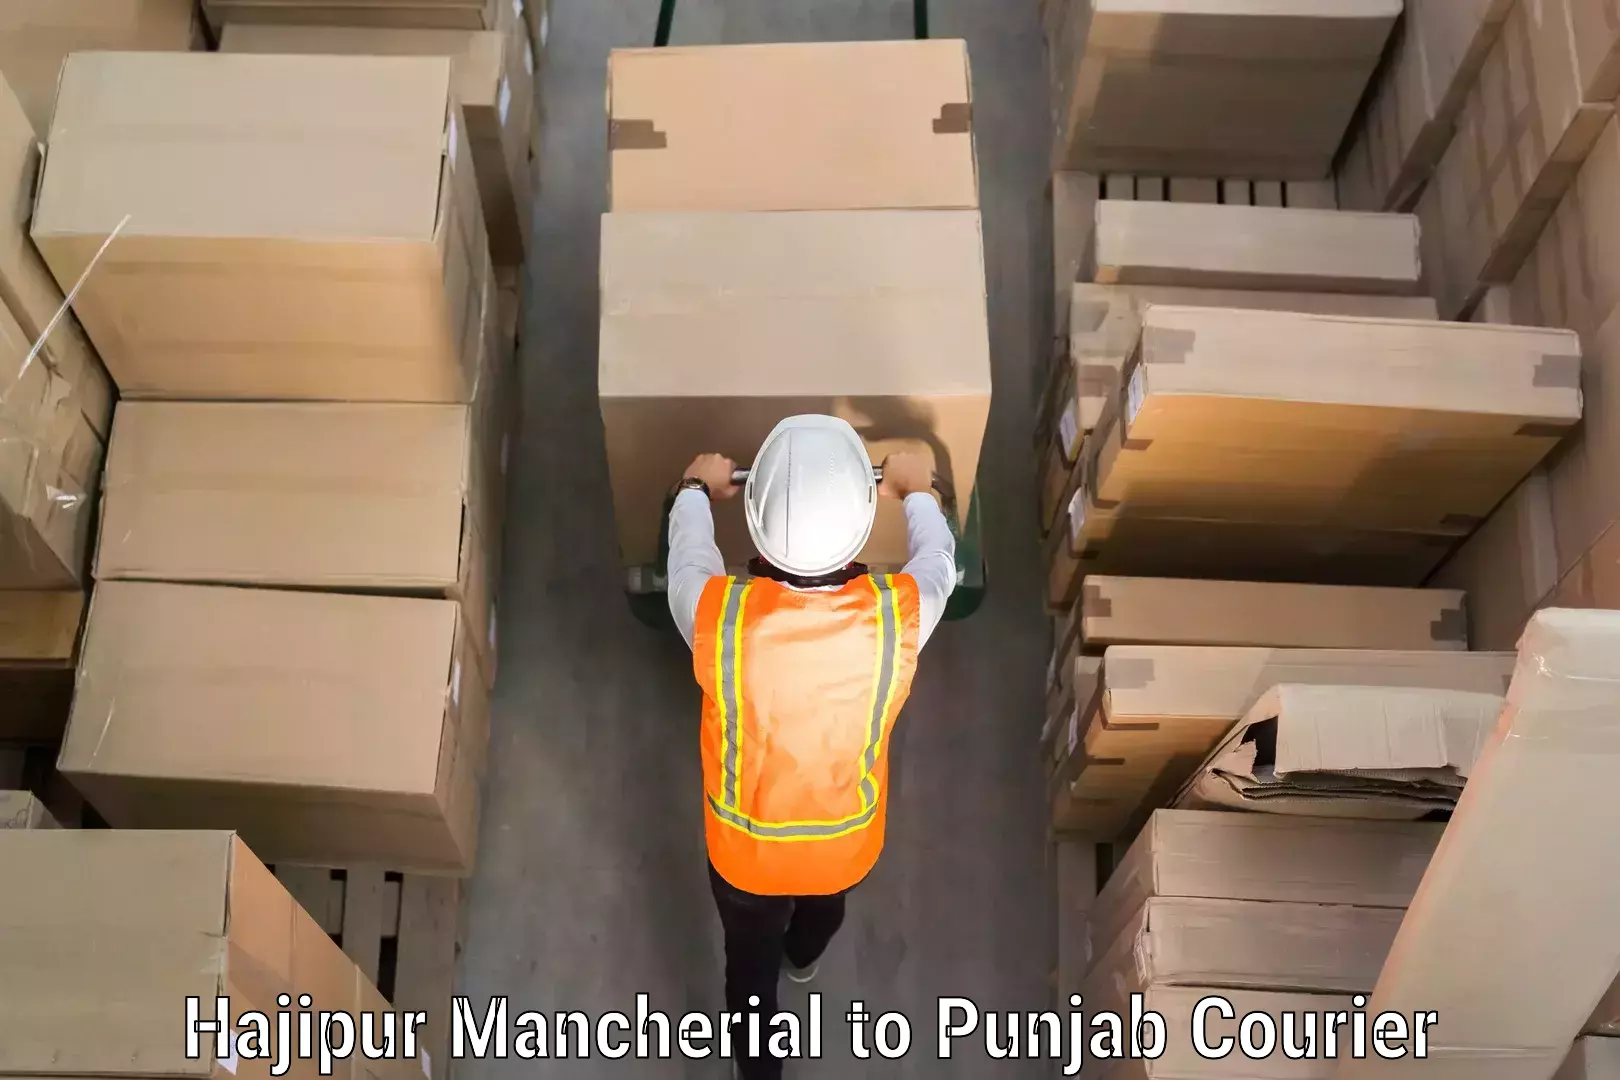 Luggage shipping service Hajipur Mancherial to Thapar Institute of Engineering and Technology Patiala